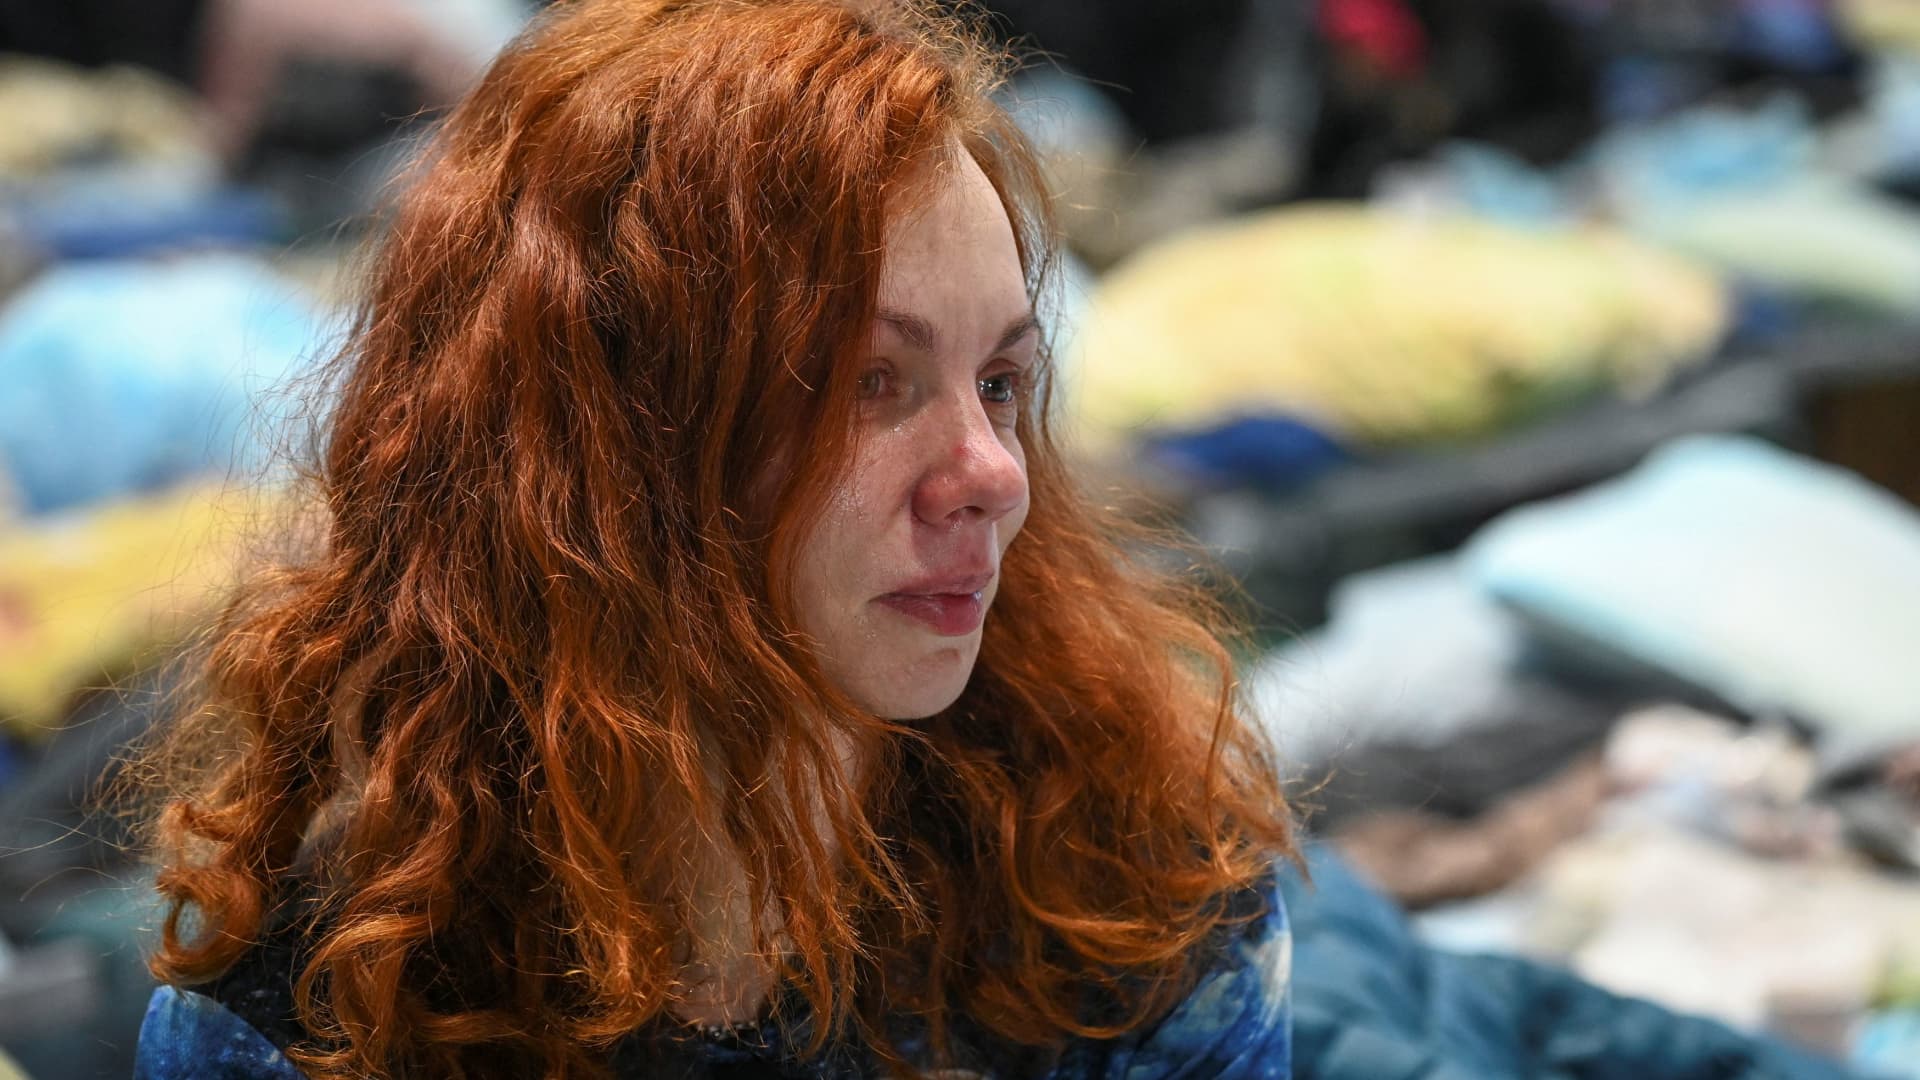 Elena Novosela, a resident of the Ukrainian city of Mariupol, reacts as she stays at a temporary accommodation centre for evacuees located in the building of a local sports school in Taganrog in the Rostov region, Russia March 23, 2022.